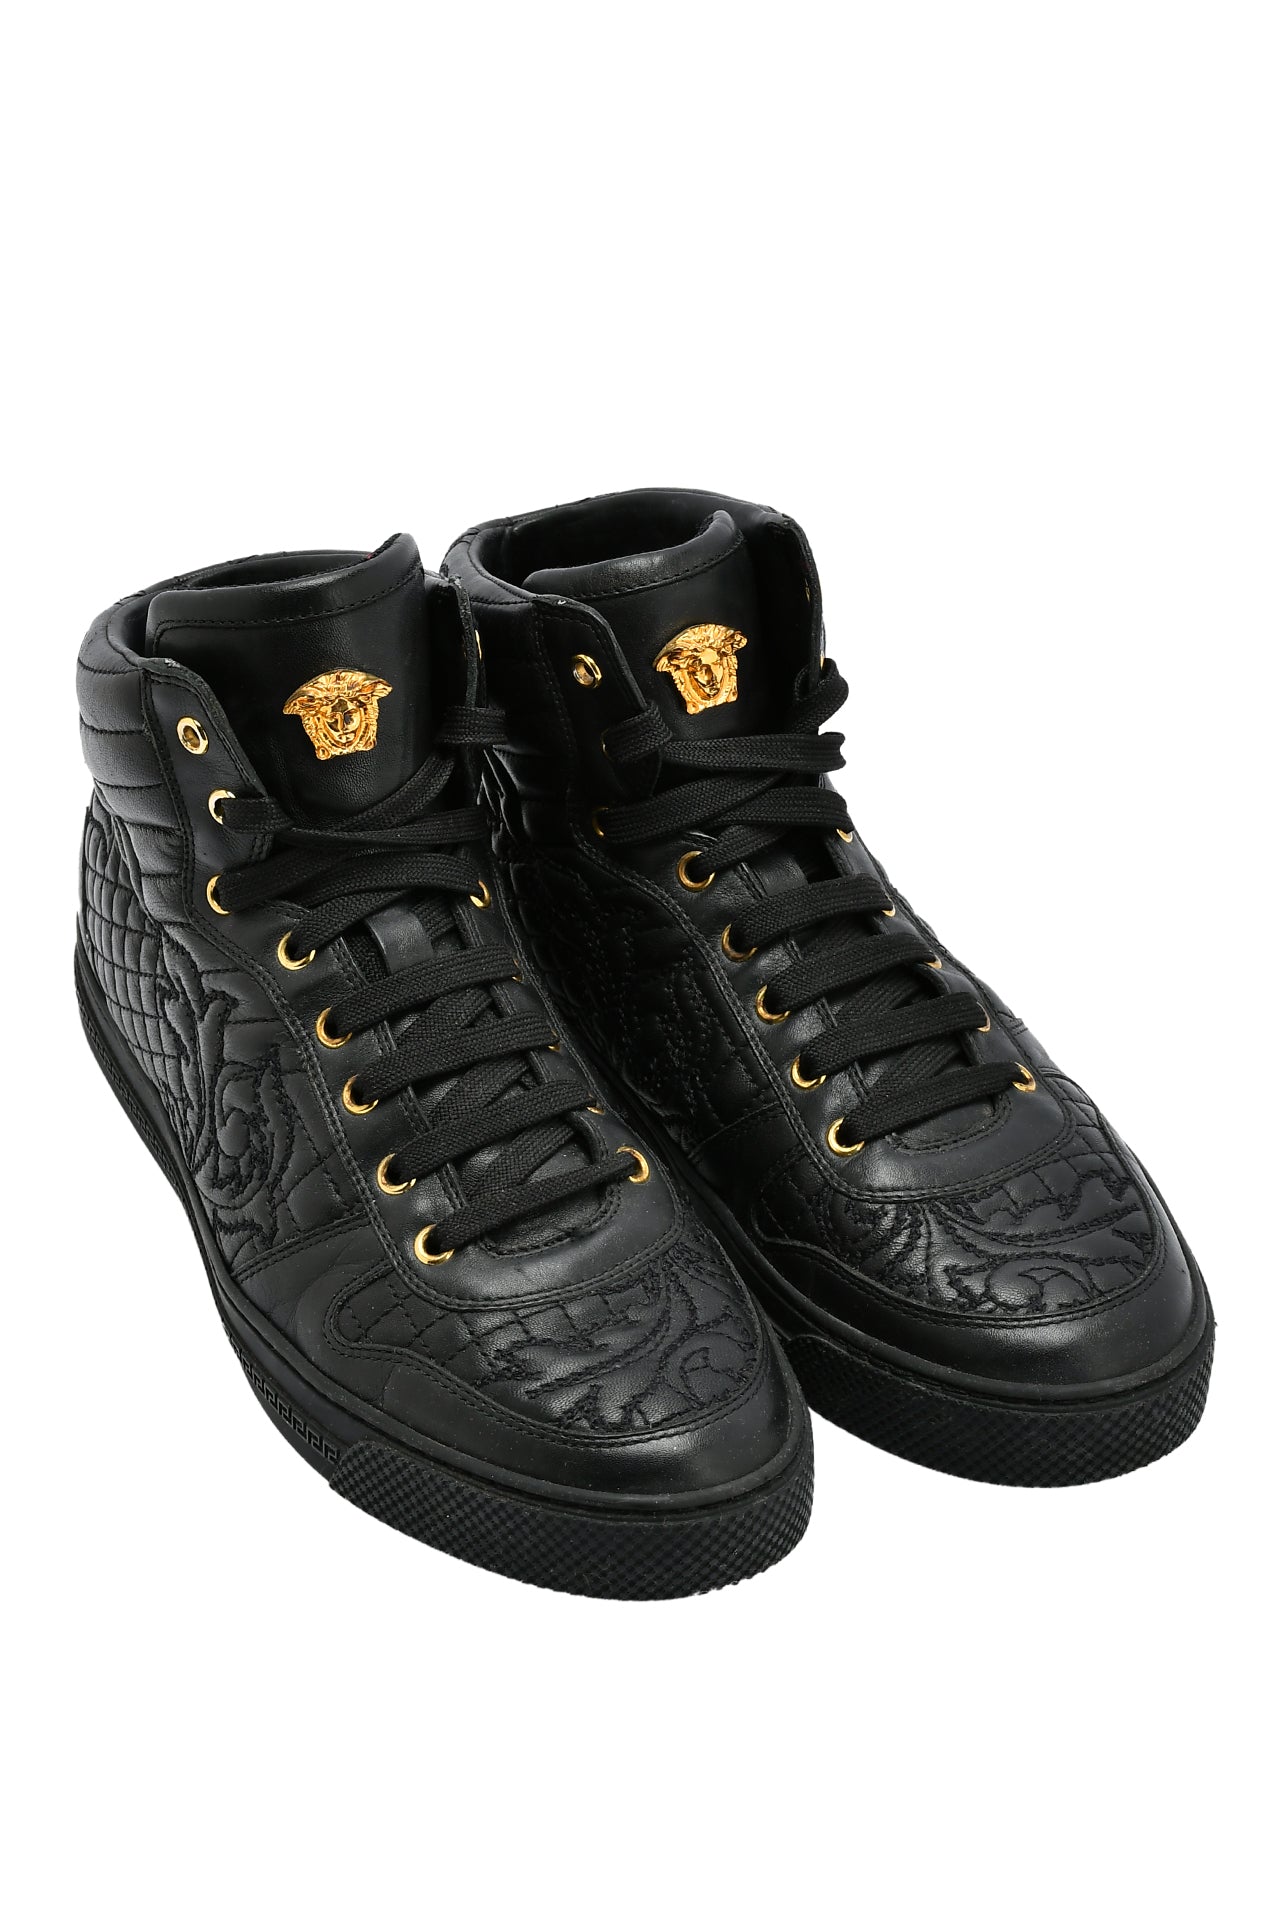 Versace Black Embroidered Leather Medusa High Top Sneakers EU 42